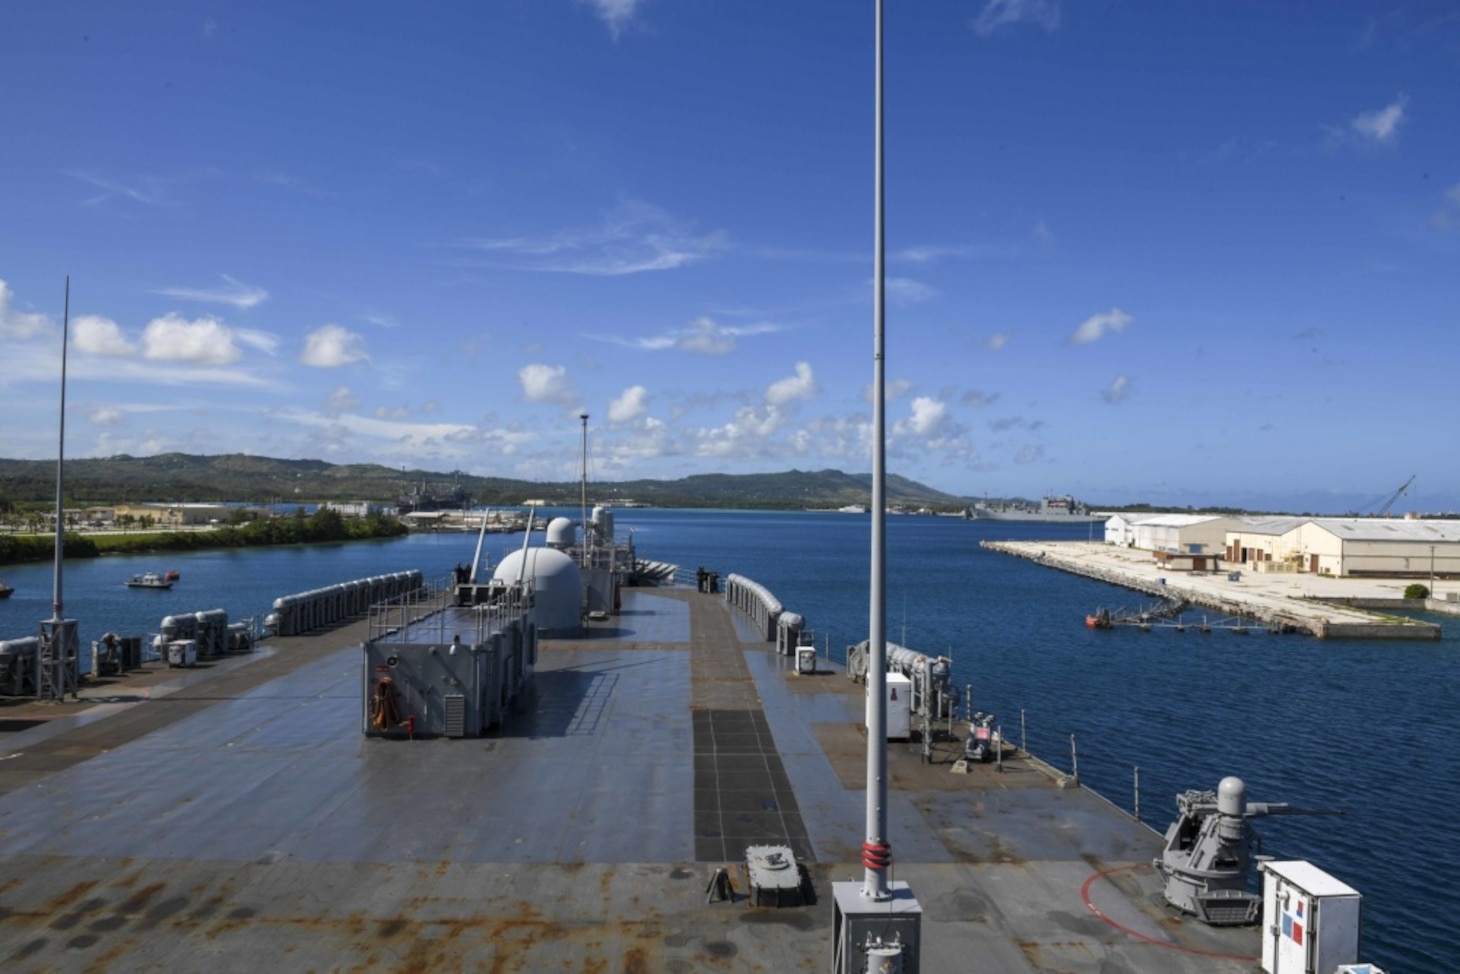 U.S. 7th Fleet flagship USS Blue Ridge (LCC 19), her crew and embarked 7th Fleet staff, prepare to enter port in Naval Base, Guam, for Blue Ridge's second Safe Haven Liberty June 11, 2020. Blue Ridge is the oldest operational ship in the Navy and, as 7th Fleet command ship, actively works to foster relationships with allies and partners in the Indo-Pacific region.